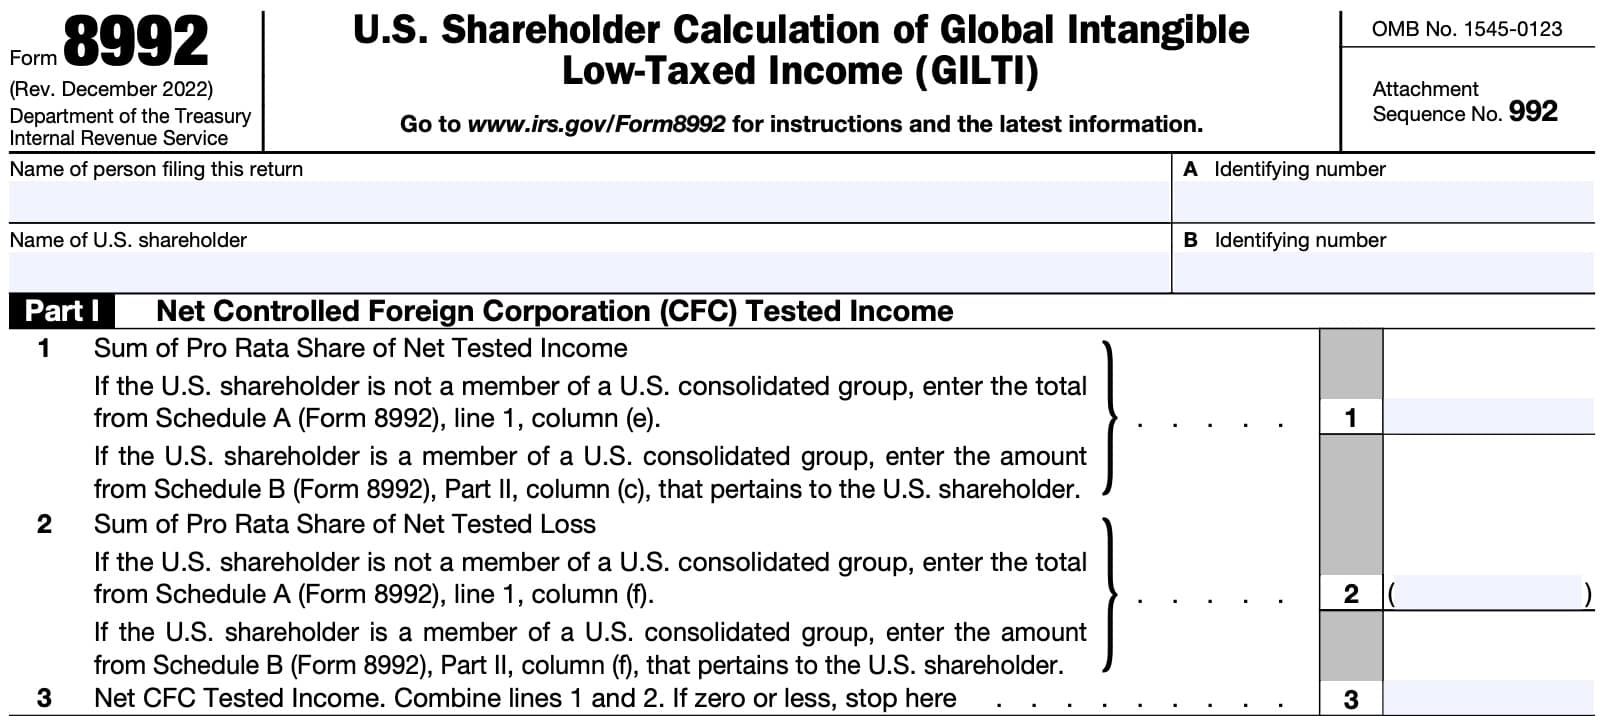 irs form 8992, part i: net controlled foreign corporation tested income